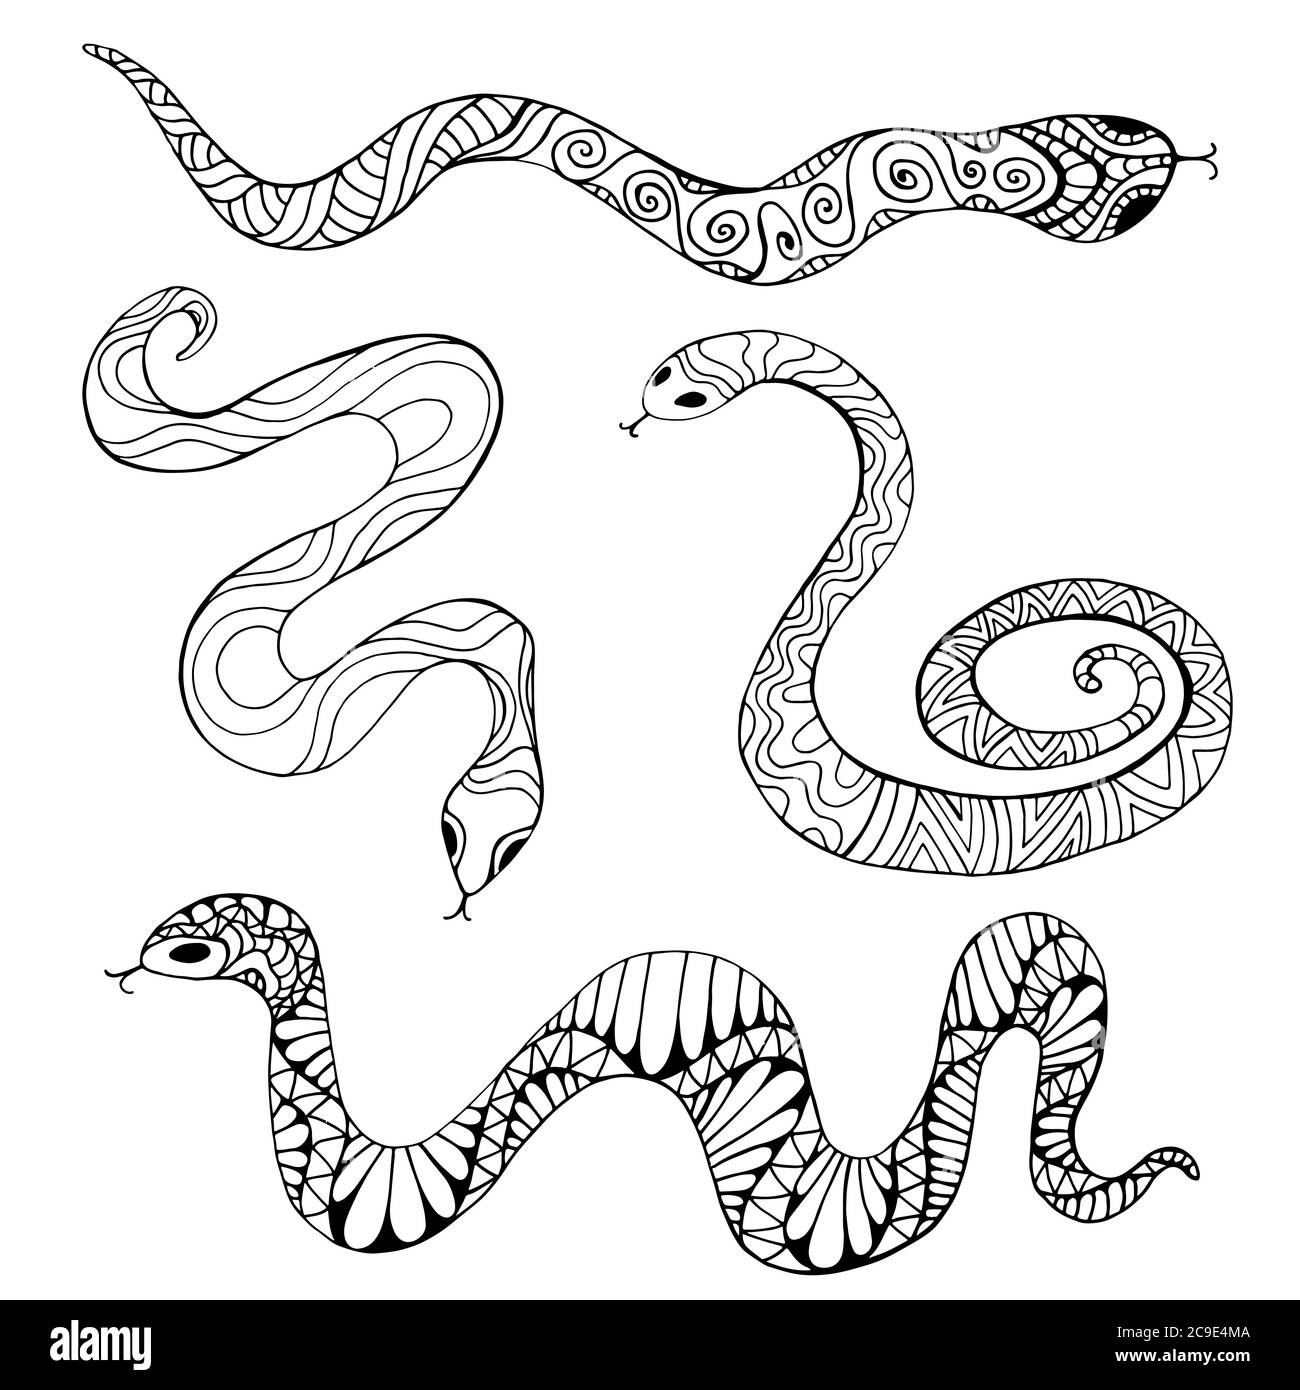 Coloring page collection with decorative ethnic snakes isolated on white background vector hand drawn illustration with ornamentals reptiles abstra stock vector image art